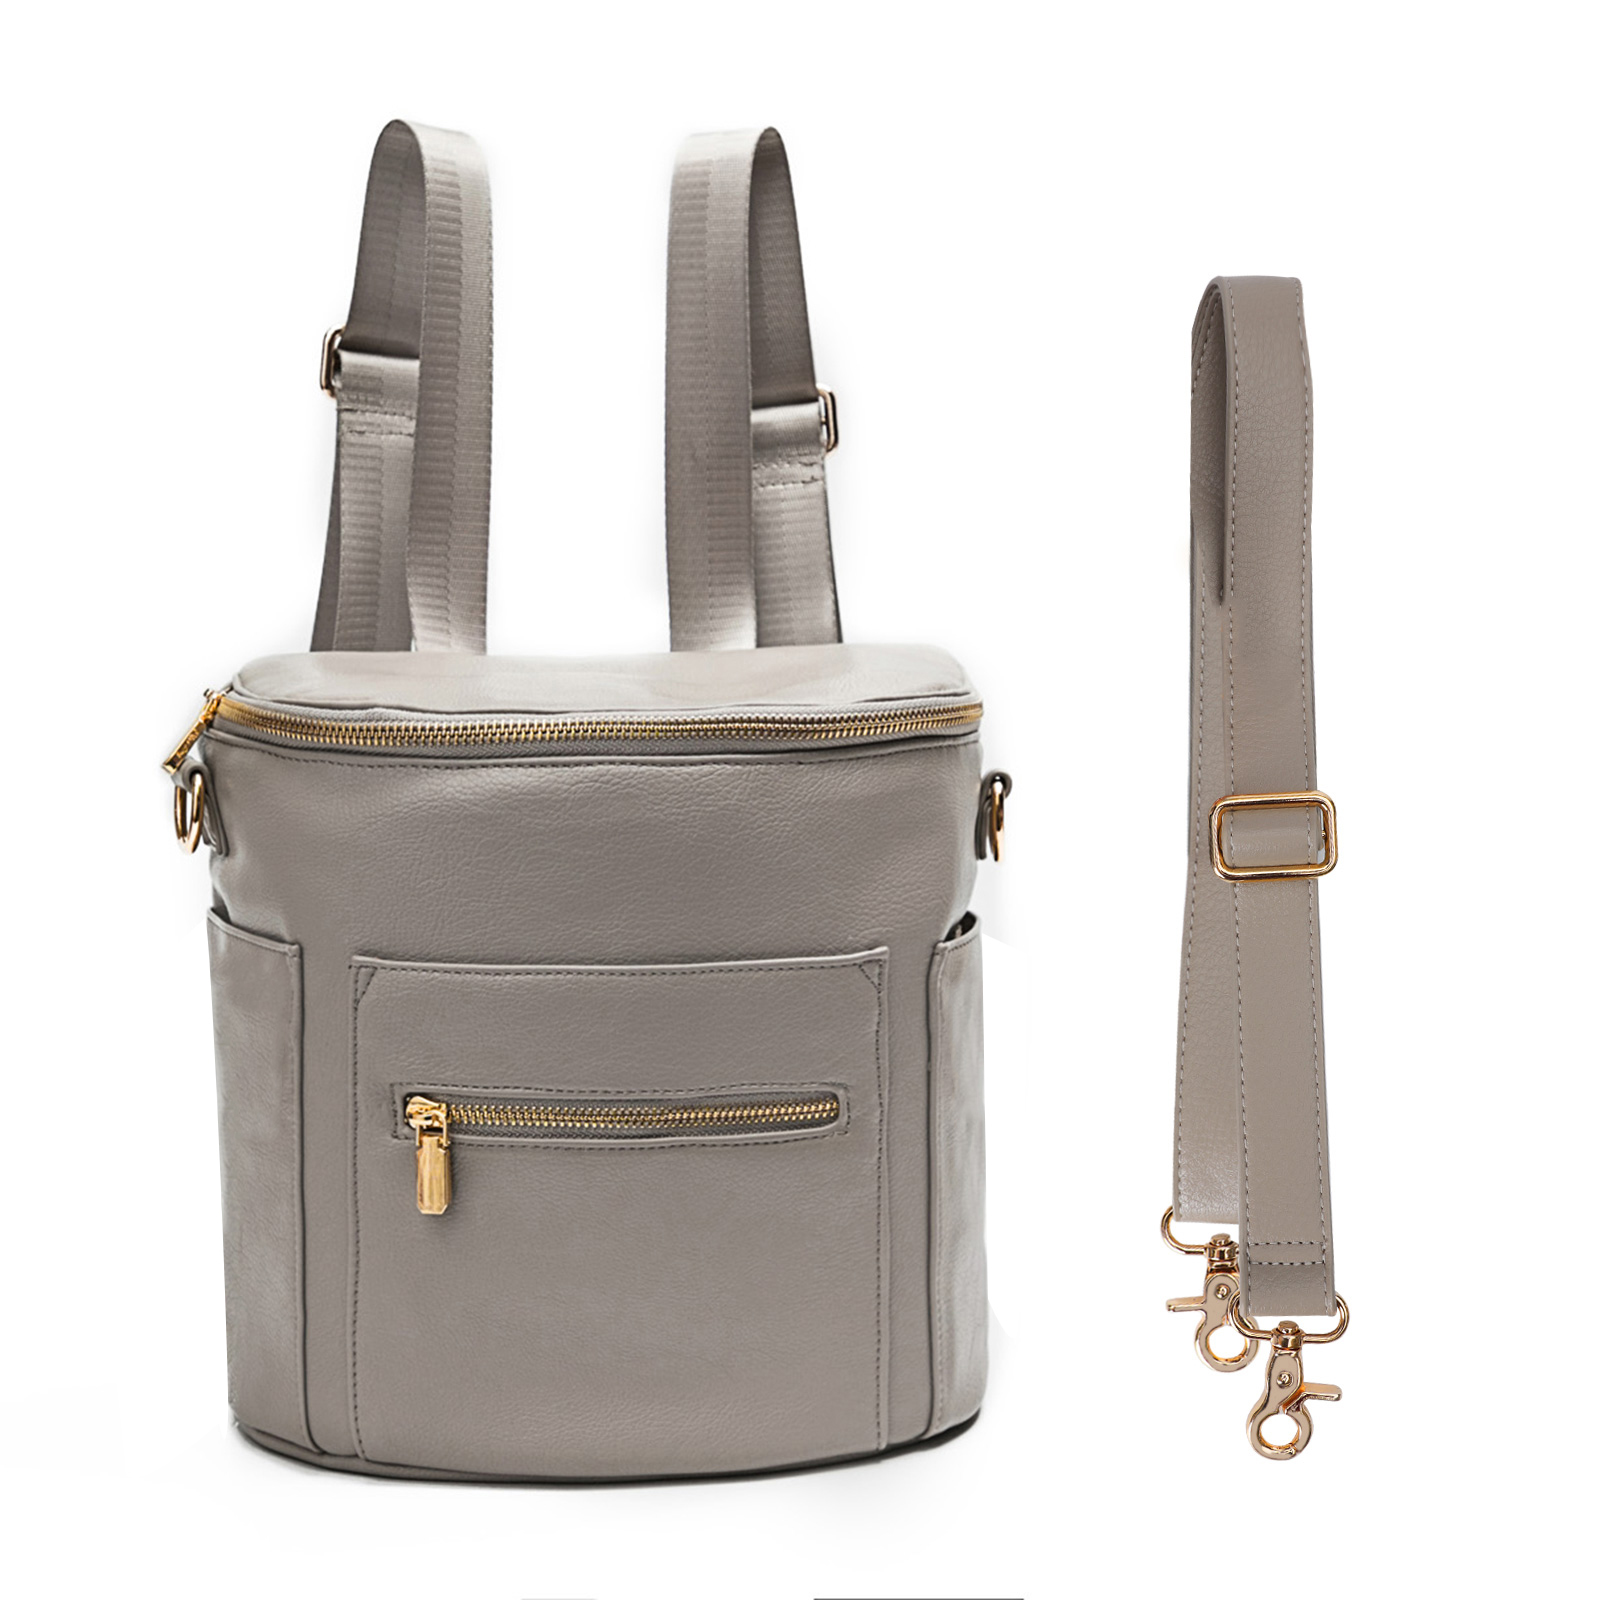 Leather Diaper Bag Backpack Tote By Miss Fong (Grey)